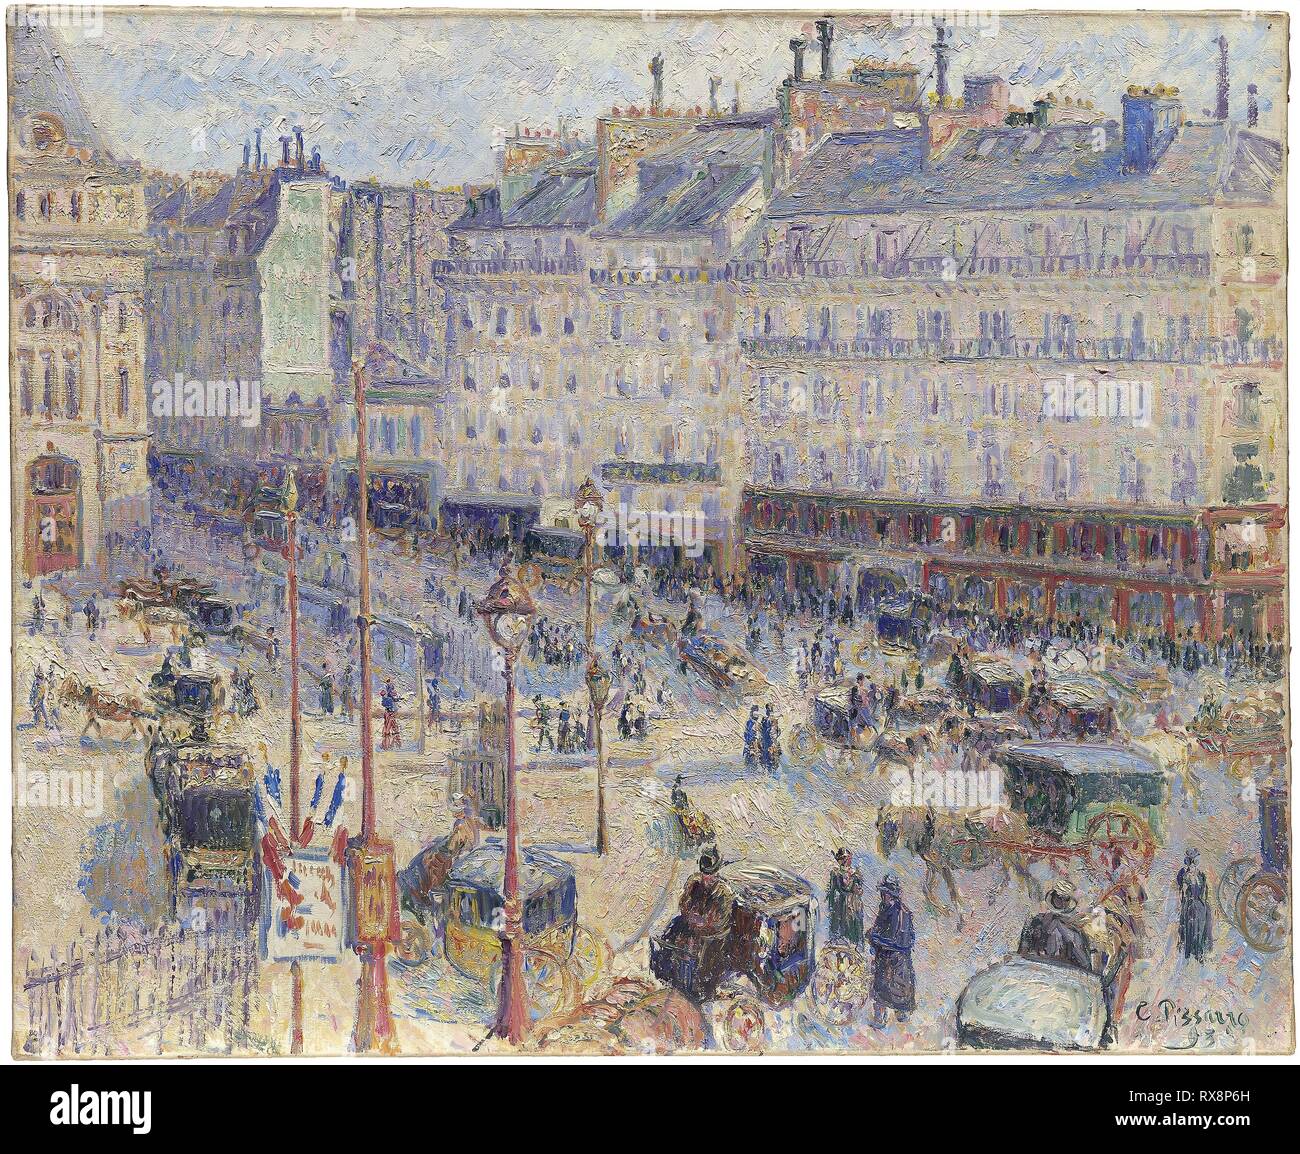 The Place du Havre, Paris. Camille Pissarro; French, 1830-1903. Date: 1893. Dimensions: 60.1 × 73.5 cm (23 5/8 × 28 13/16 in.). Oil on canvas. Origin: France. Museum: The Chicago Art Institute. Stock Photo